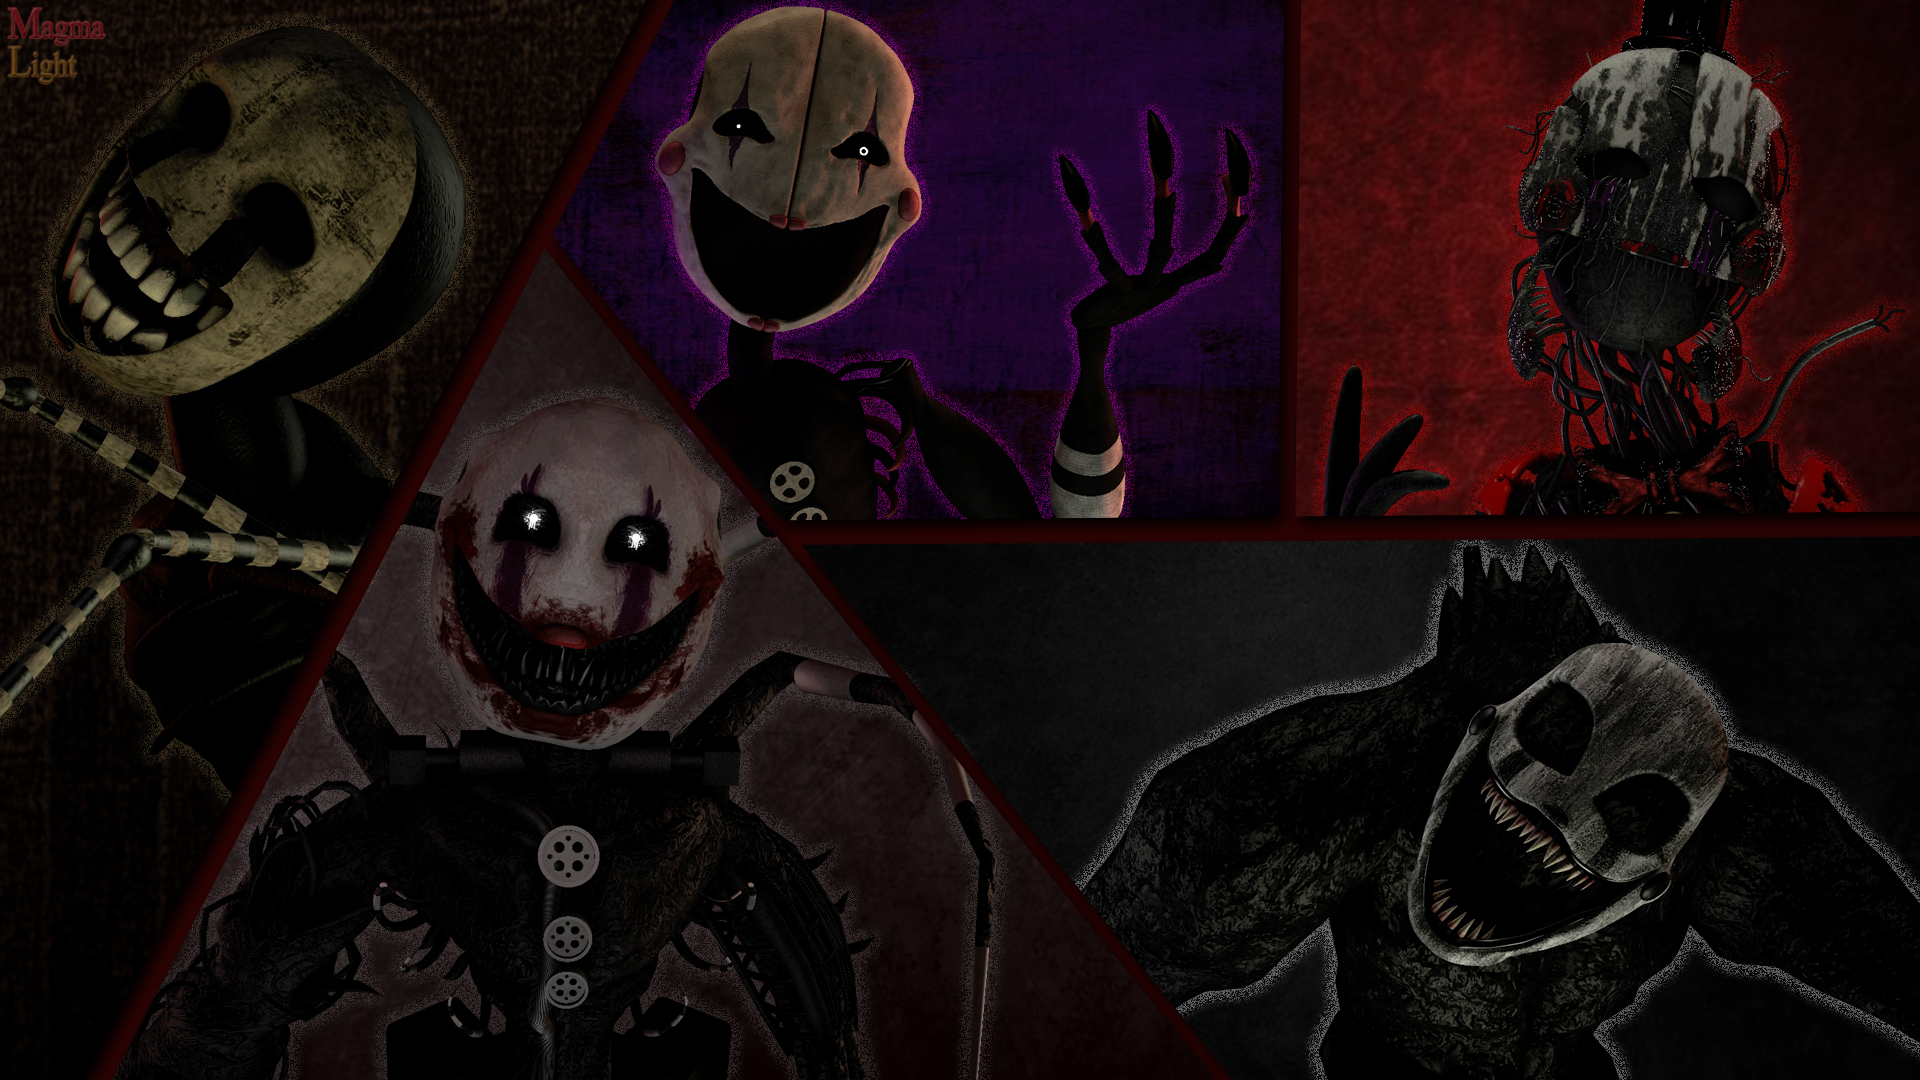 NIGHTMARE FNAF4 confirmed brightened cleared by CraftyMaelyss on DeviantArt